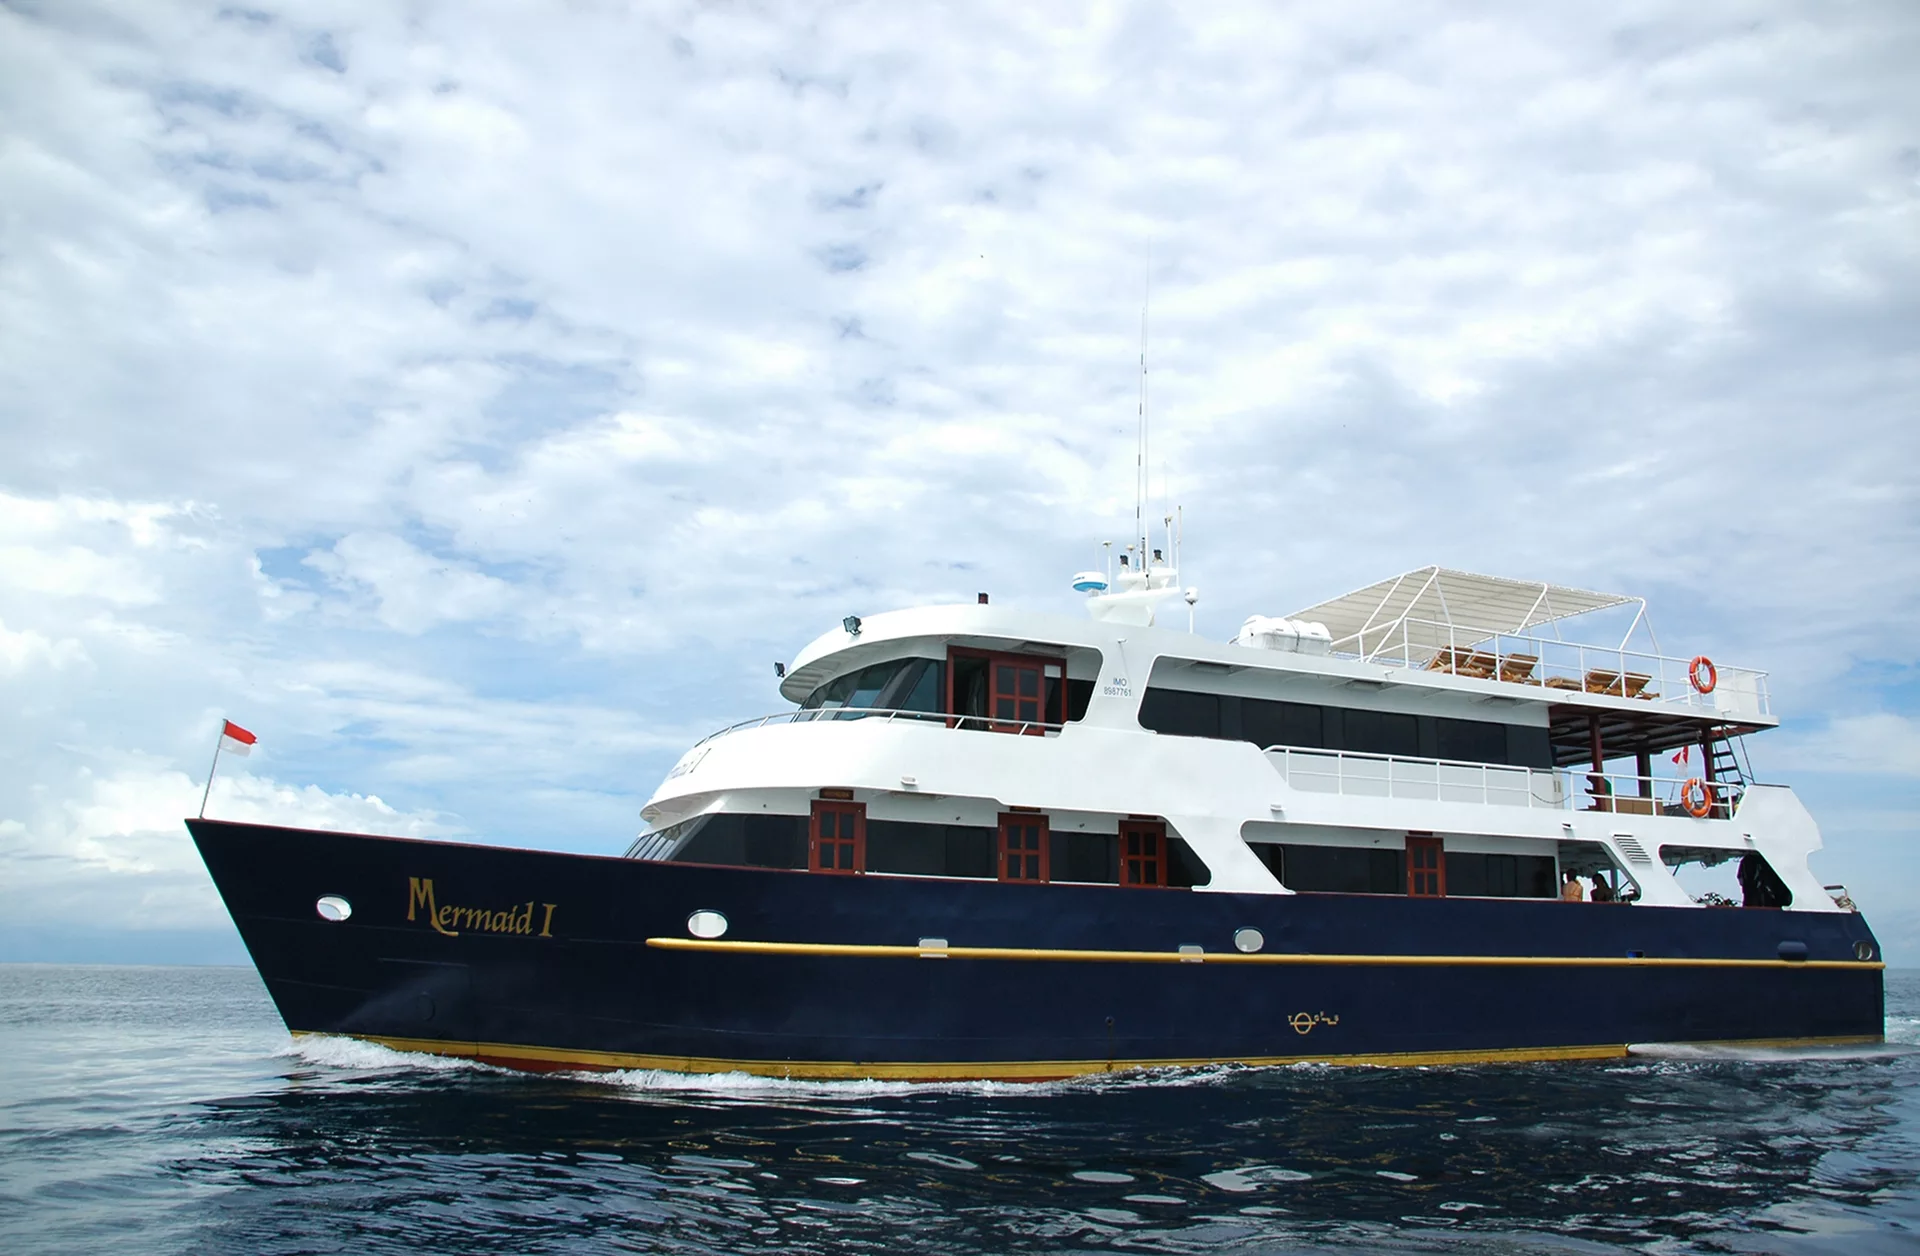 picture of the MV mermaid I liveaboard vessel